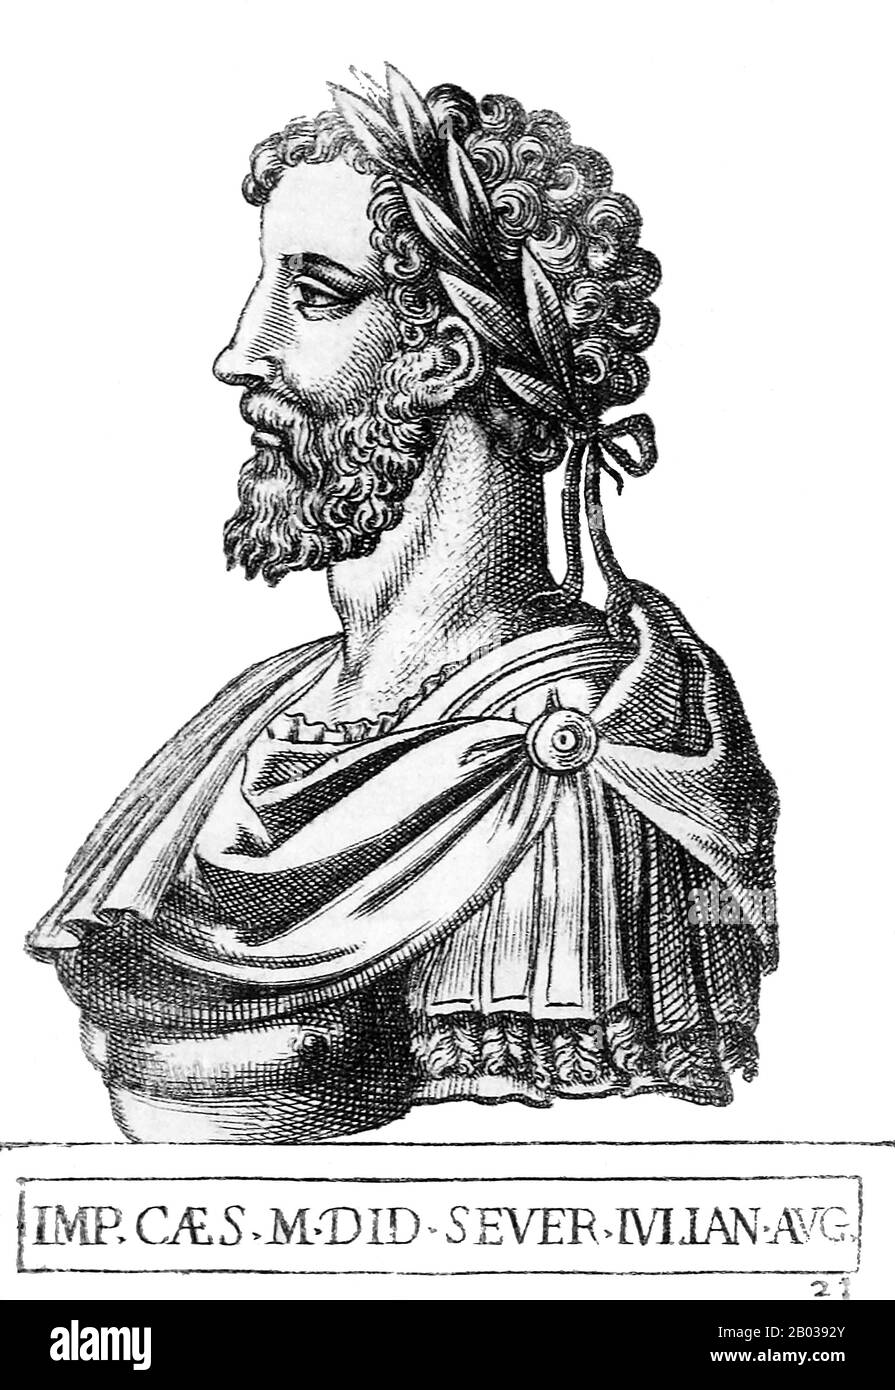 Didius Julianus (133/137-193) was raised by Domitia Lucilla, the mother of emperor Marcus Aurelius, and was groomed for public office and distinction. He served in the Roman army, and was raised to consulship alongside Pertinax in 175 CE for his successes against the Germanic tribes.  After the Praetorian Guard murdered Pertinax in March 193, they put the imperial throne up for bidding, willing to sell it to whomever could pay the most. Julianus won the bidding war, and was declared as Caesar and emperor, with the Senate formalising the declaration under military threat. His controversial asce Stock Photo